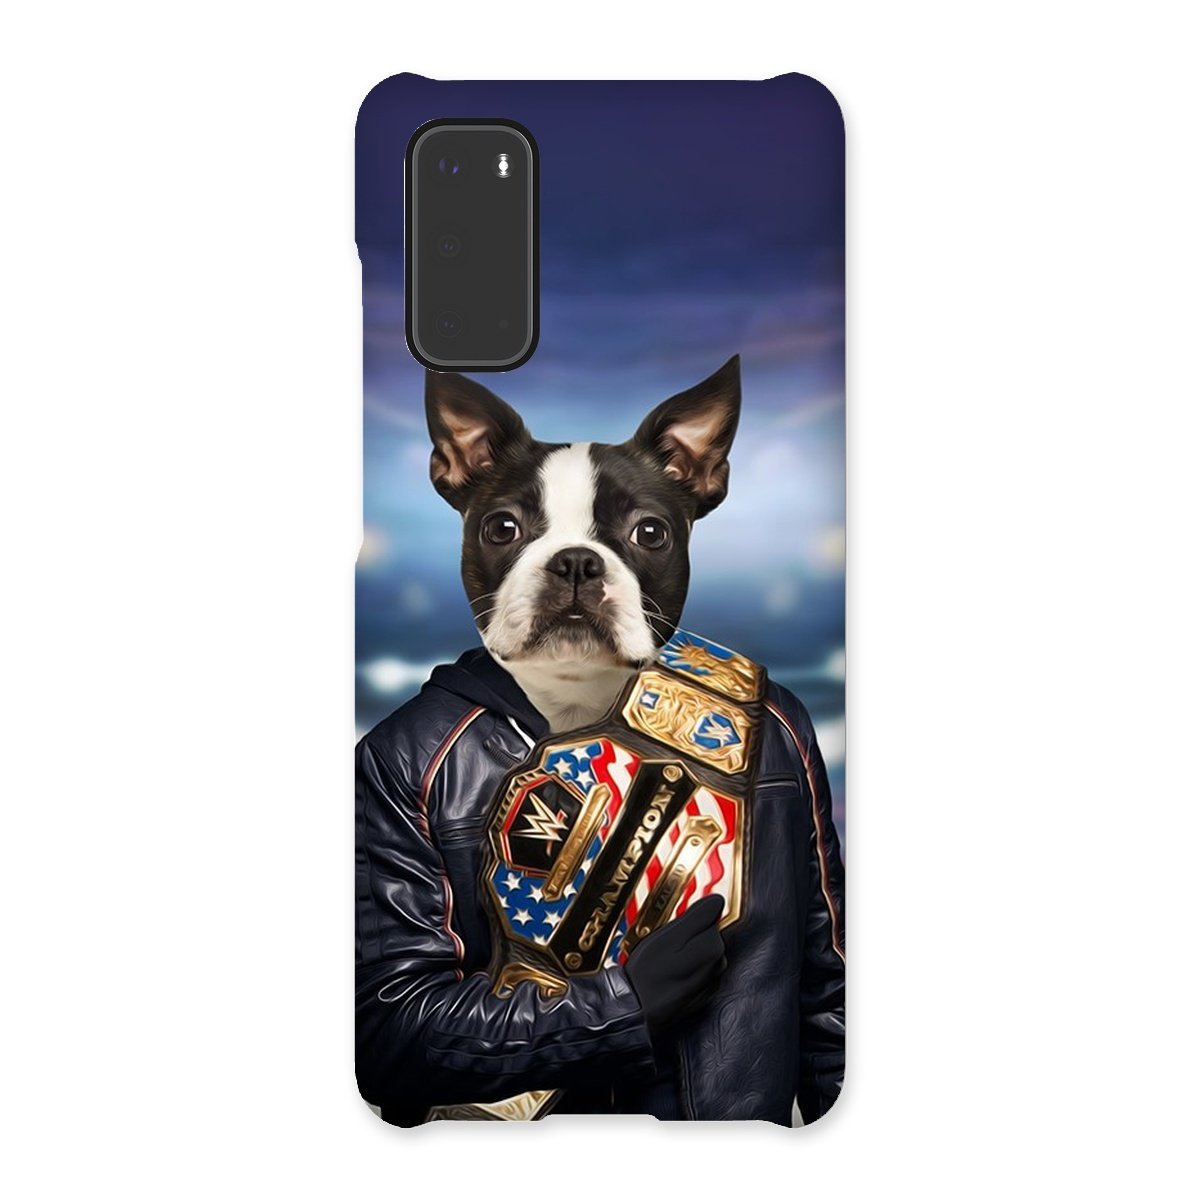 The Wrestler: Custom Pet Phone Case - Paw & Glory - pawandglory, pet portrait phone case, personalised puppy phone case, personalised pet phone case, life is better with a dog phone case, personalized iphone 11 case dogs, life is better with a dog phone case, Pet Portrait phone case,